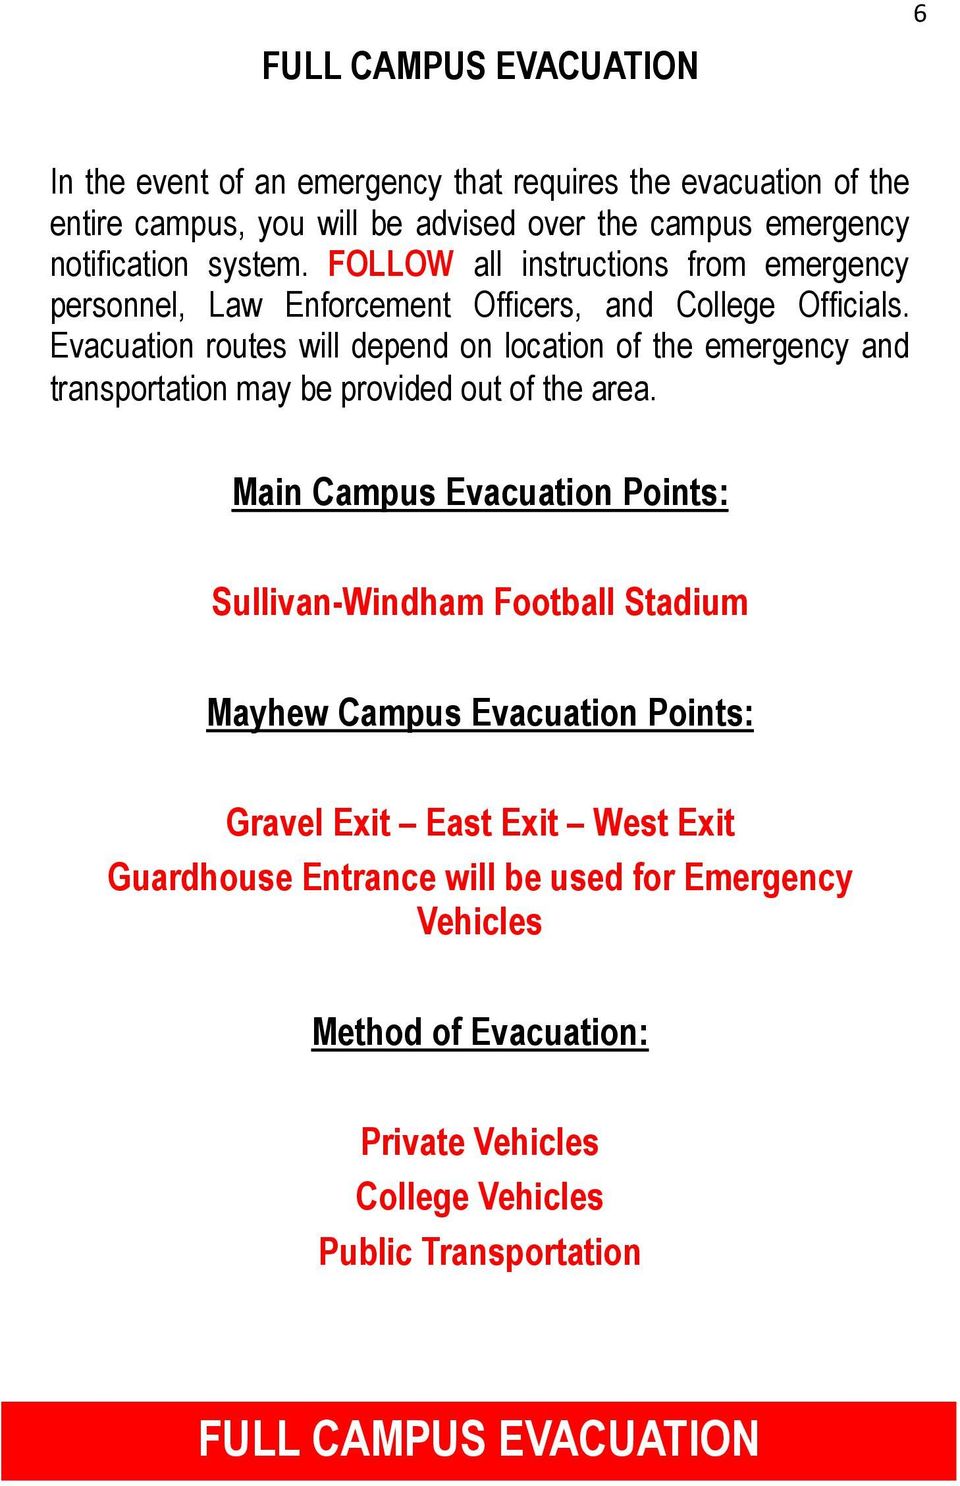 Evacuation routes will depend on location of the emergency and transportation may be provided out of the area.